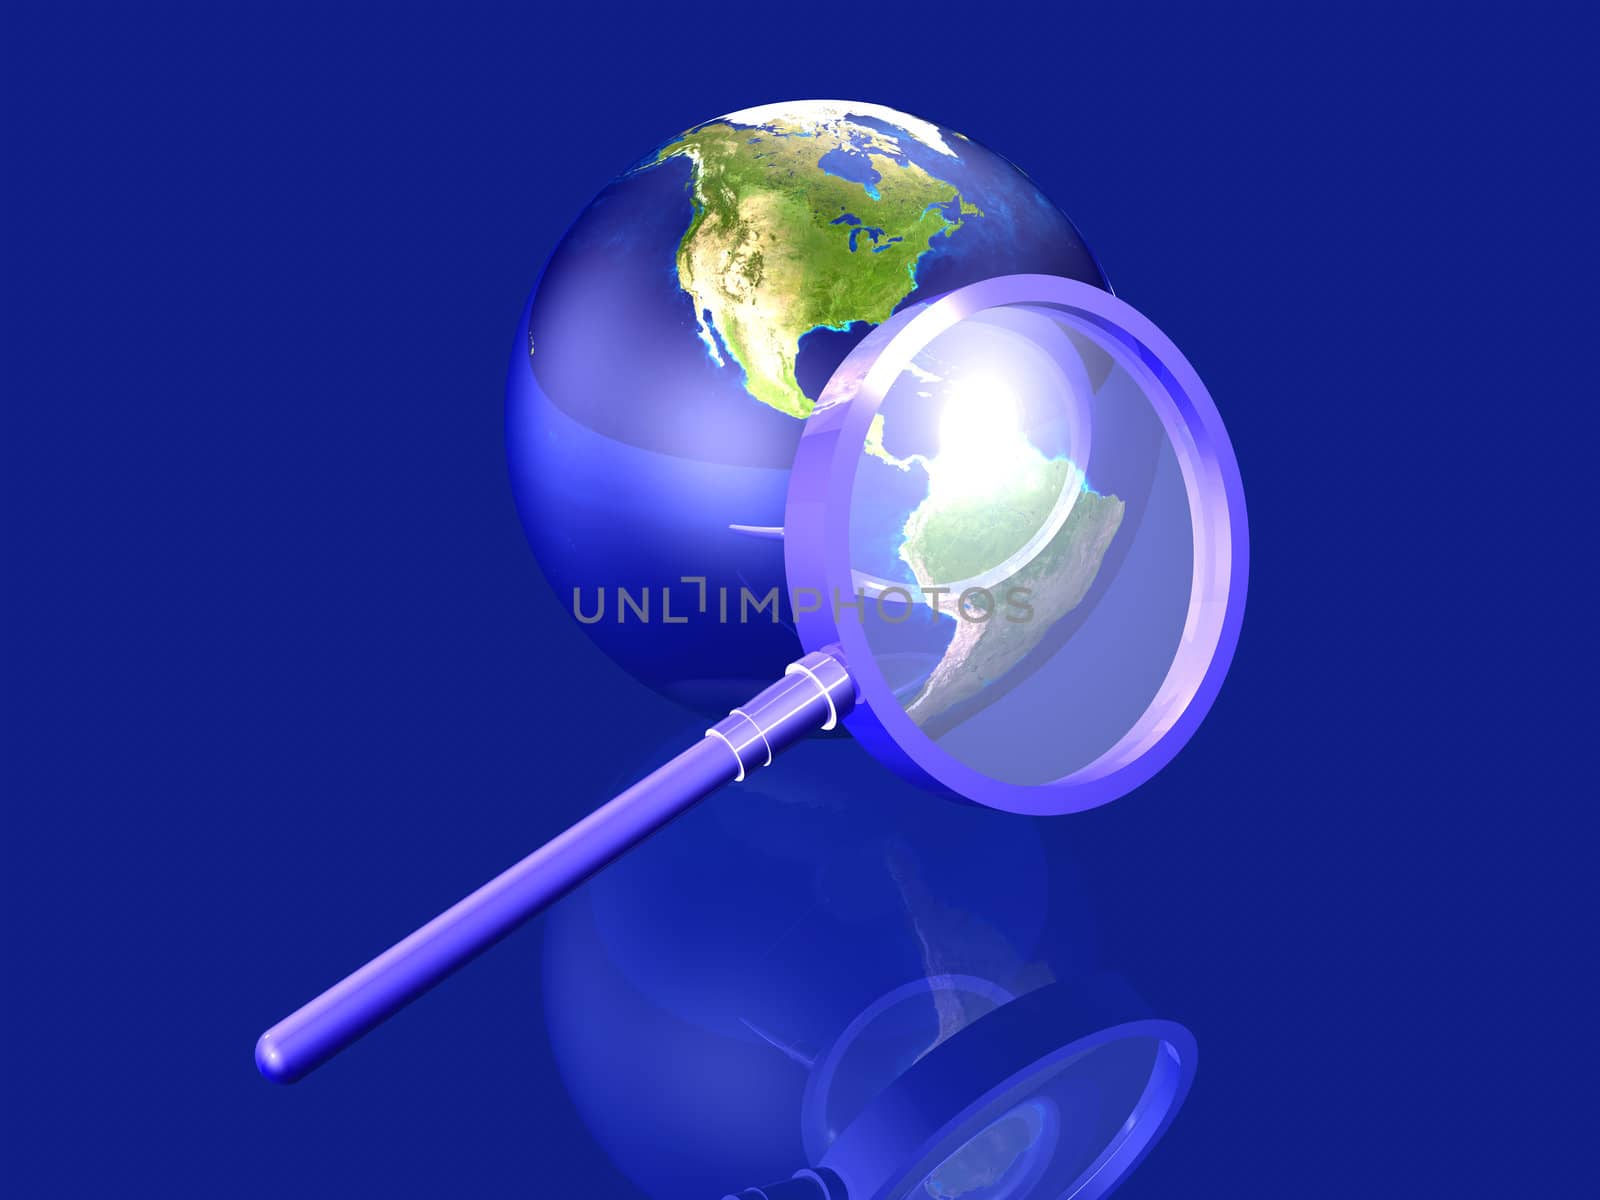 3D rendered Illustration. Texture reference: by NASA visible Earth.